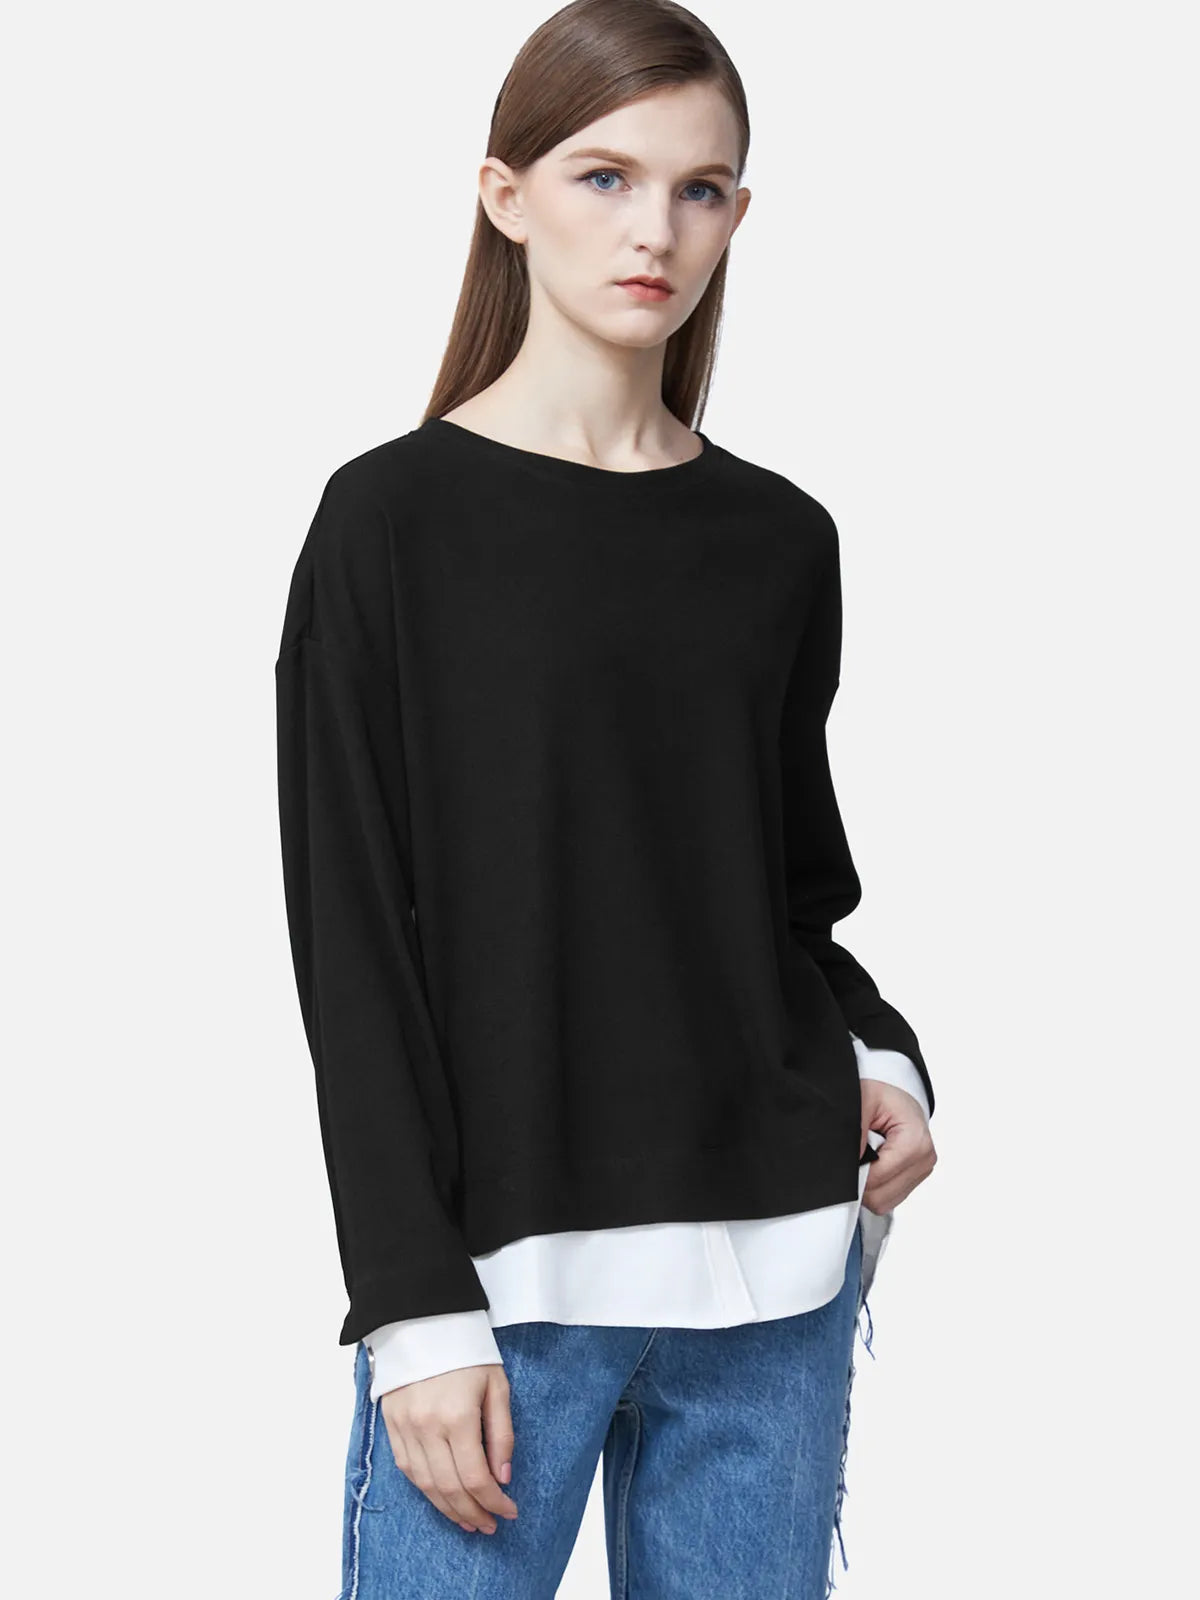 Ribbed Round Neck Color Contrast Stitching Long-Sleeved T-Shirt